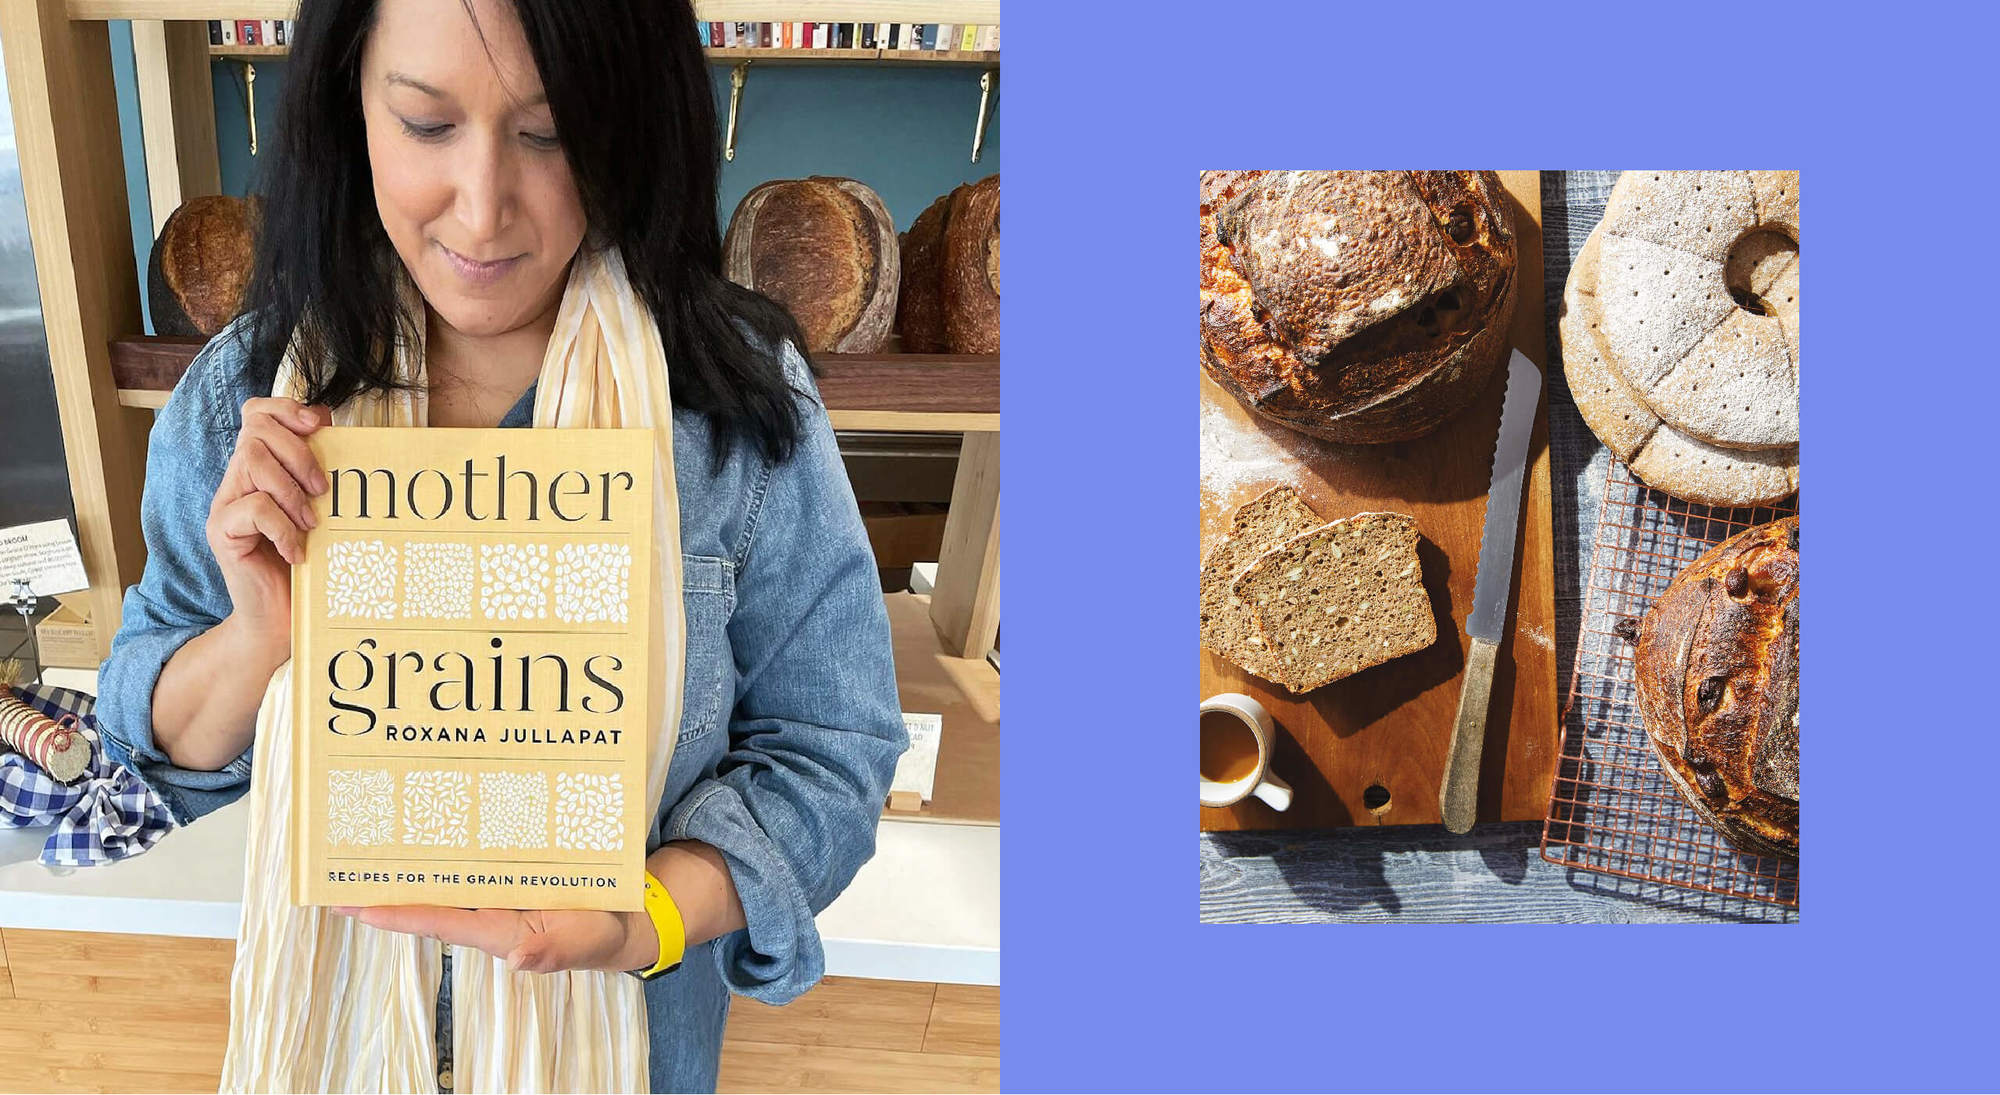 Roxana Jullapat, left, holds her new book, Mother Grains, side by side baked goods photographed for her book with a blue background. May 2021